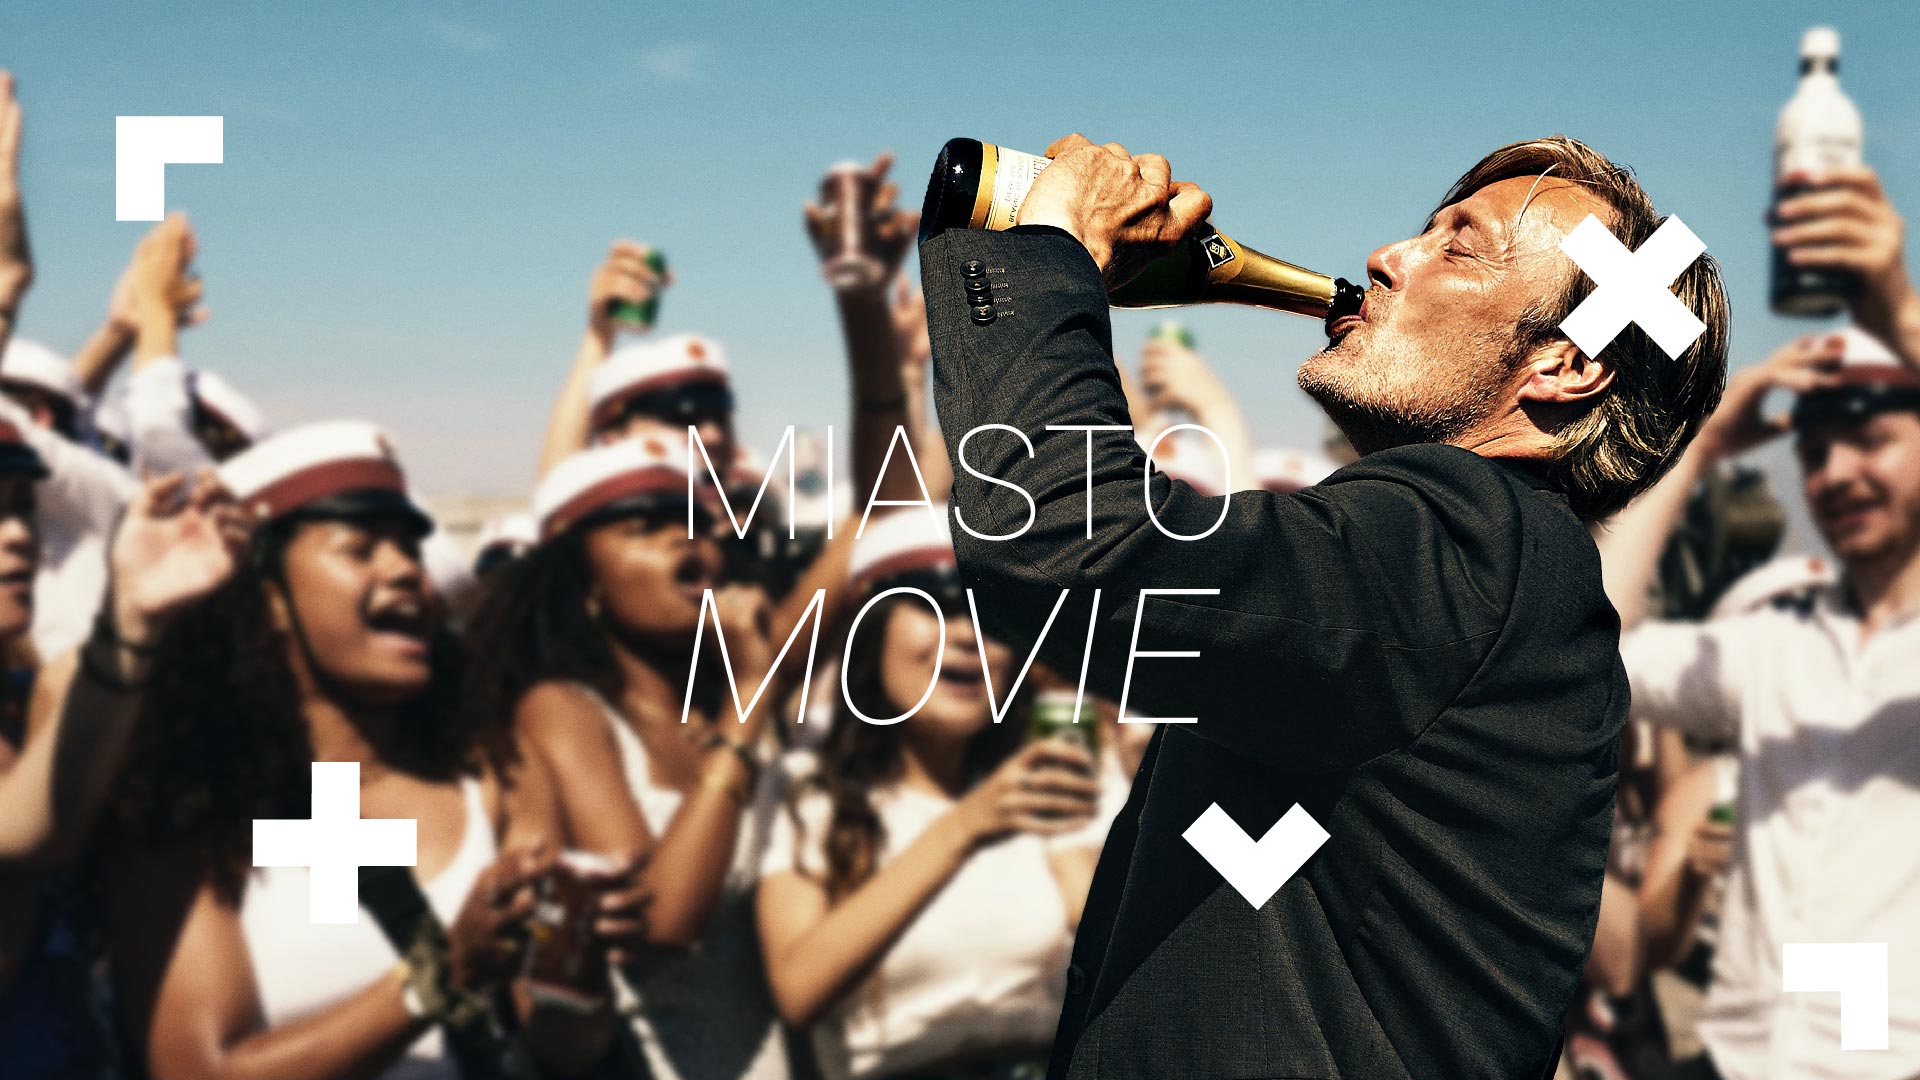 A shot from the film. The protagonist is drinking from the bottle in a crowd of people.